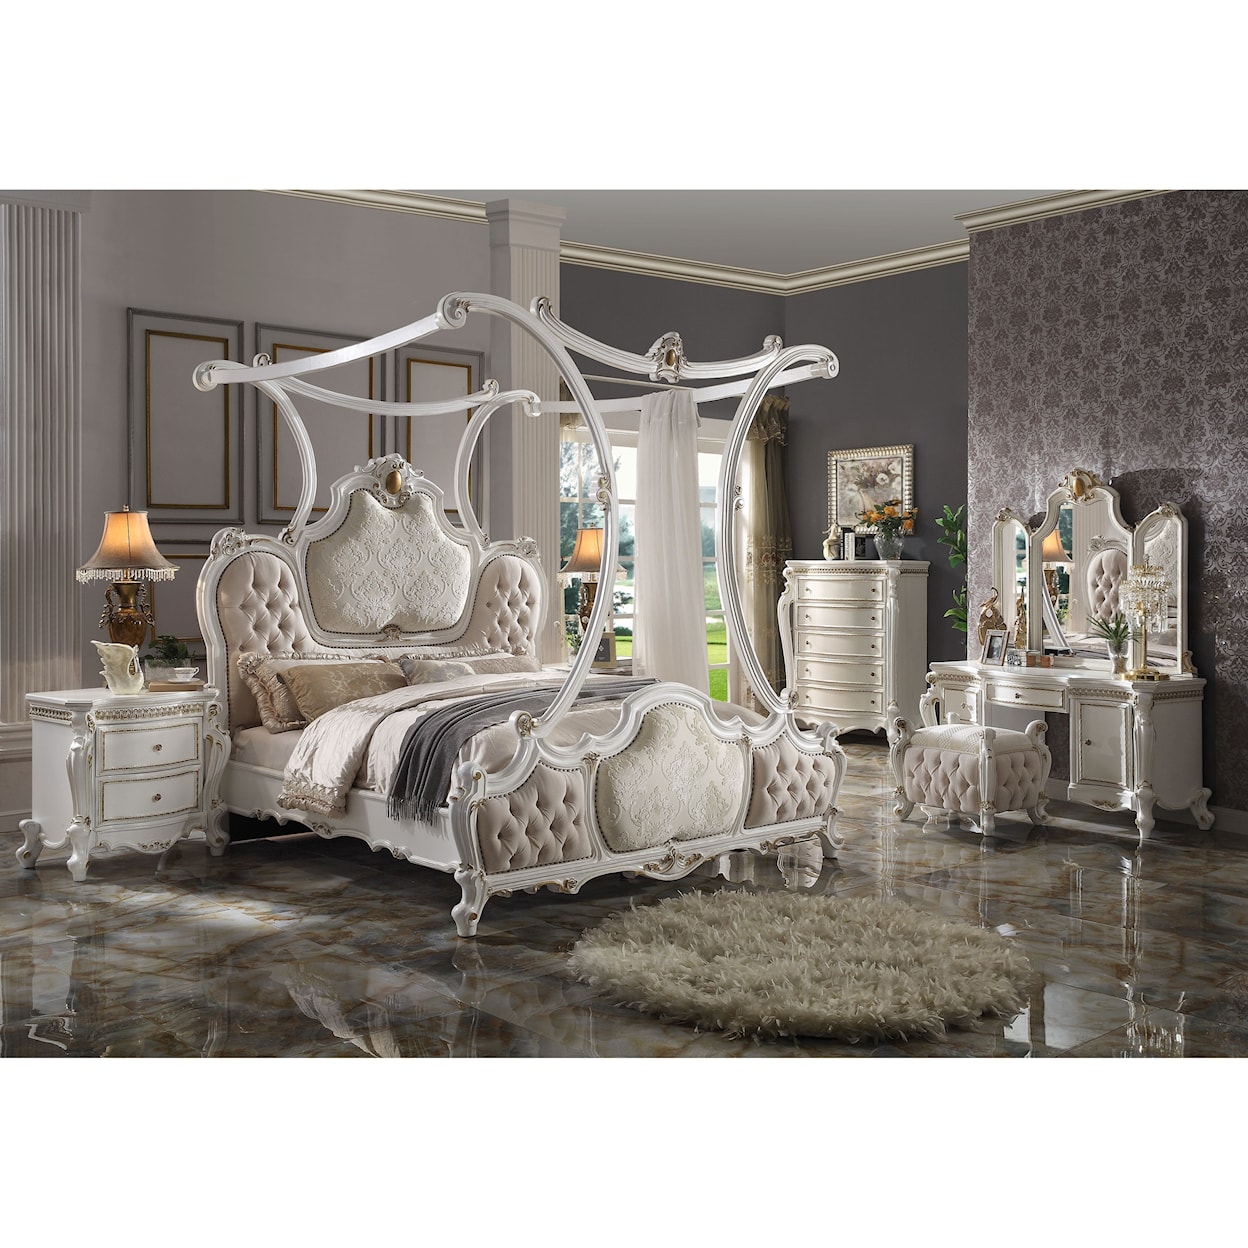 Acme Furniture Picardy King Bed (Canopy)